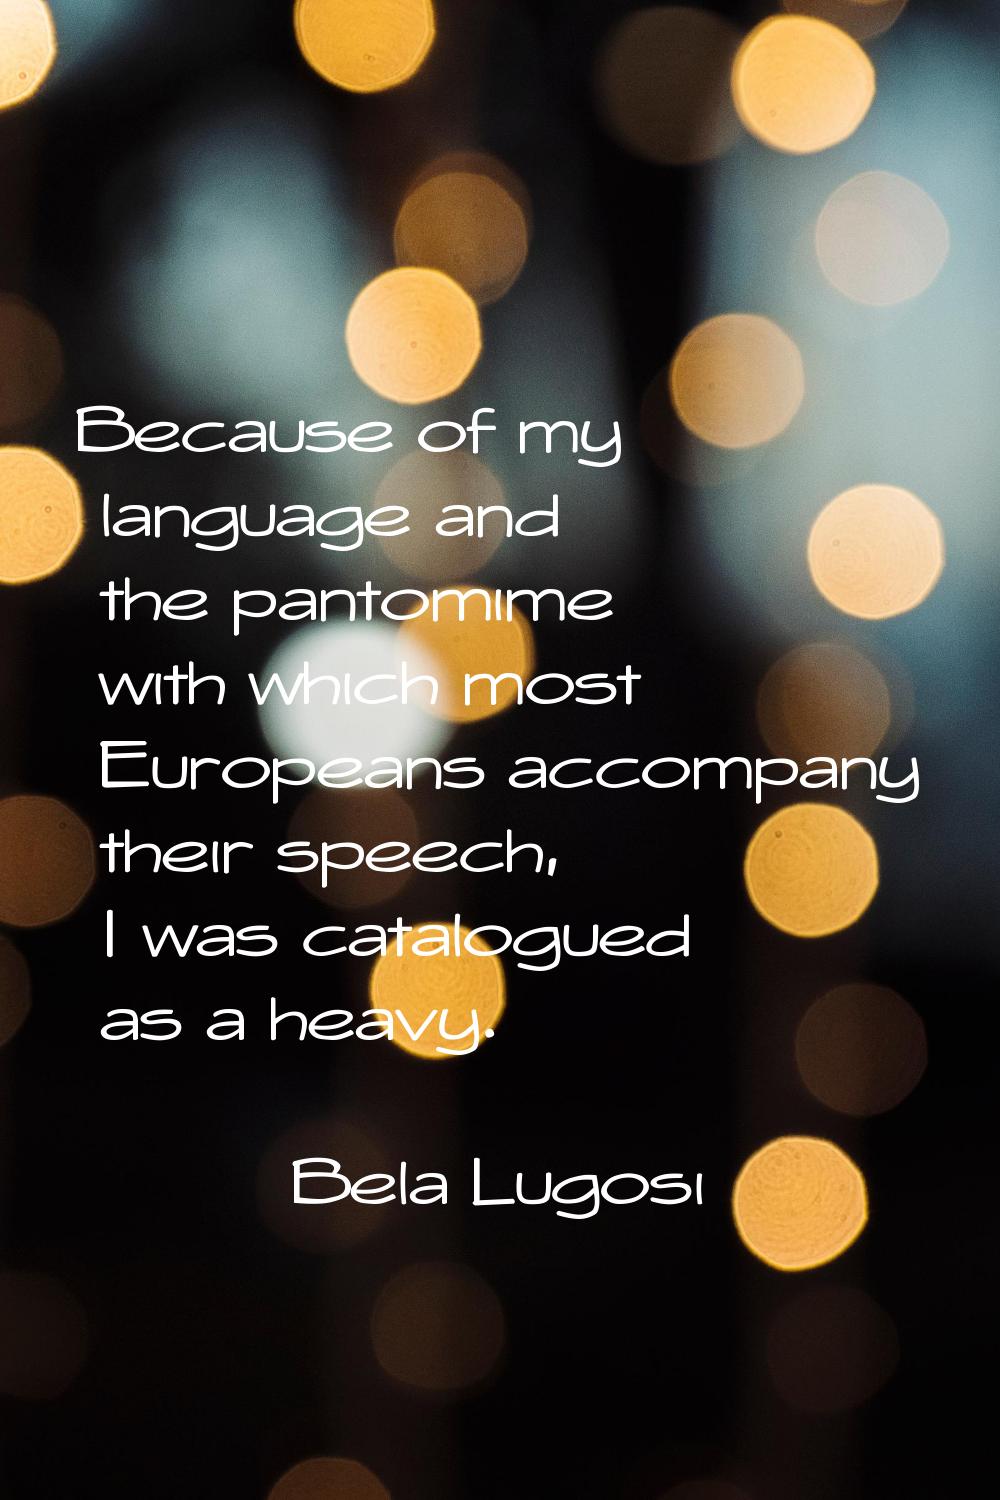 Because of my language and the pantomime with which most Europeans accompany their speech, I was ca